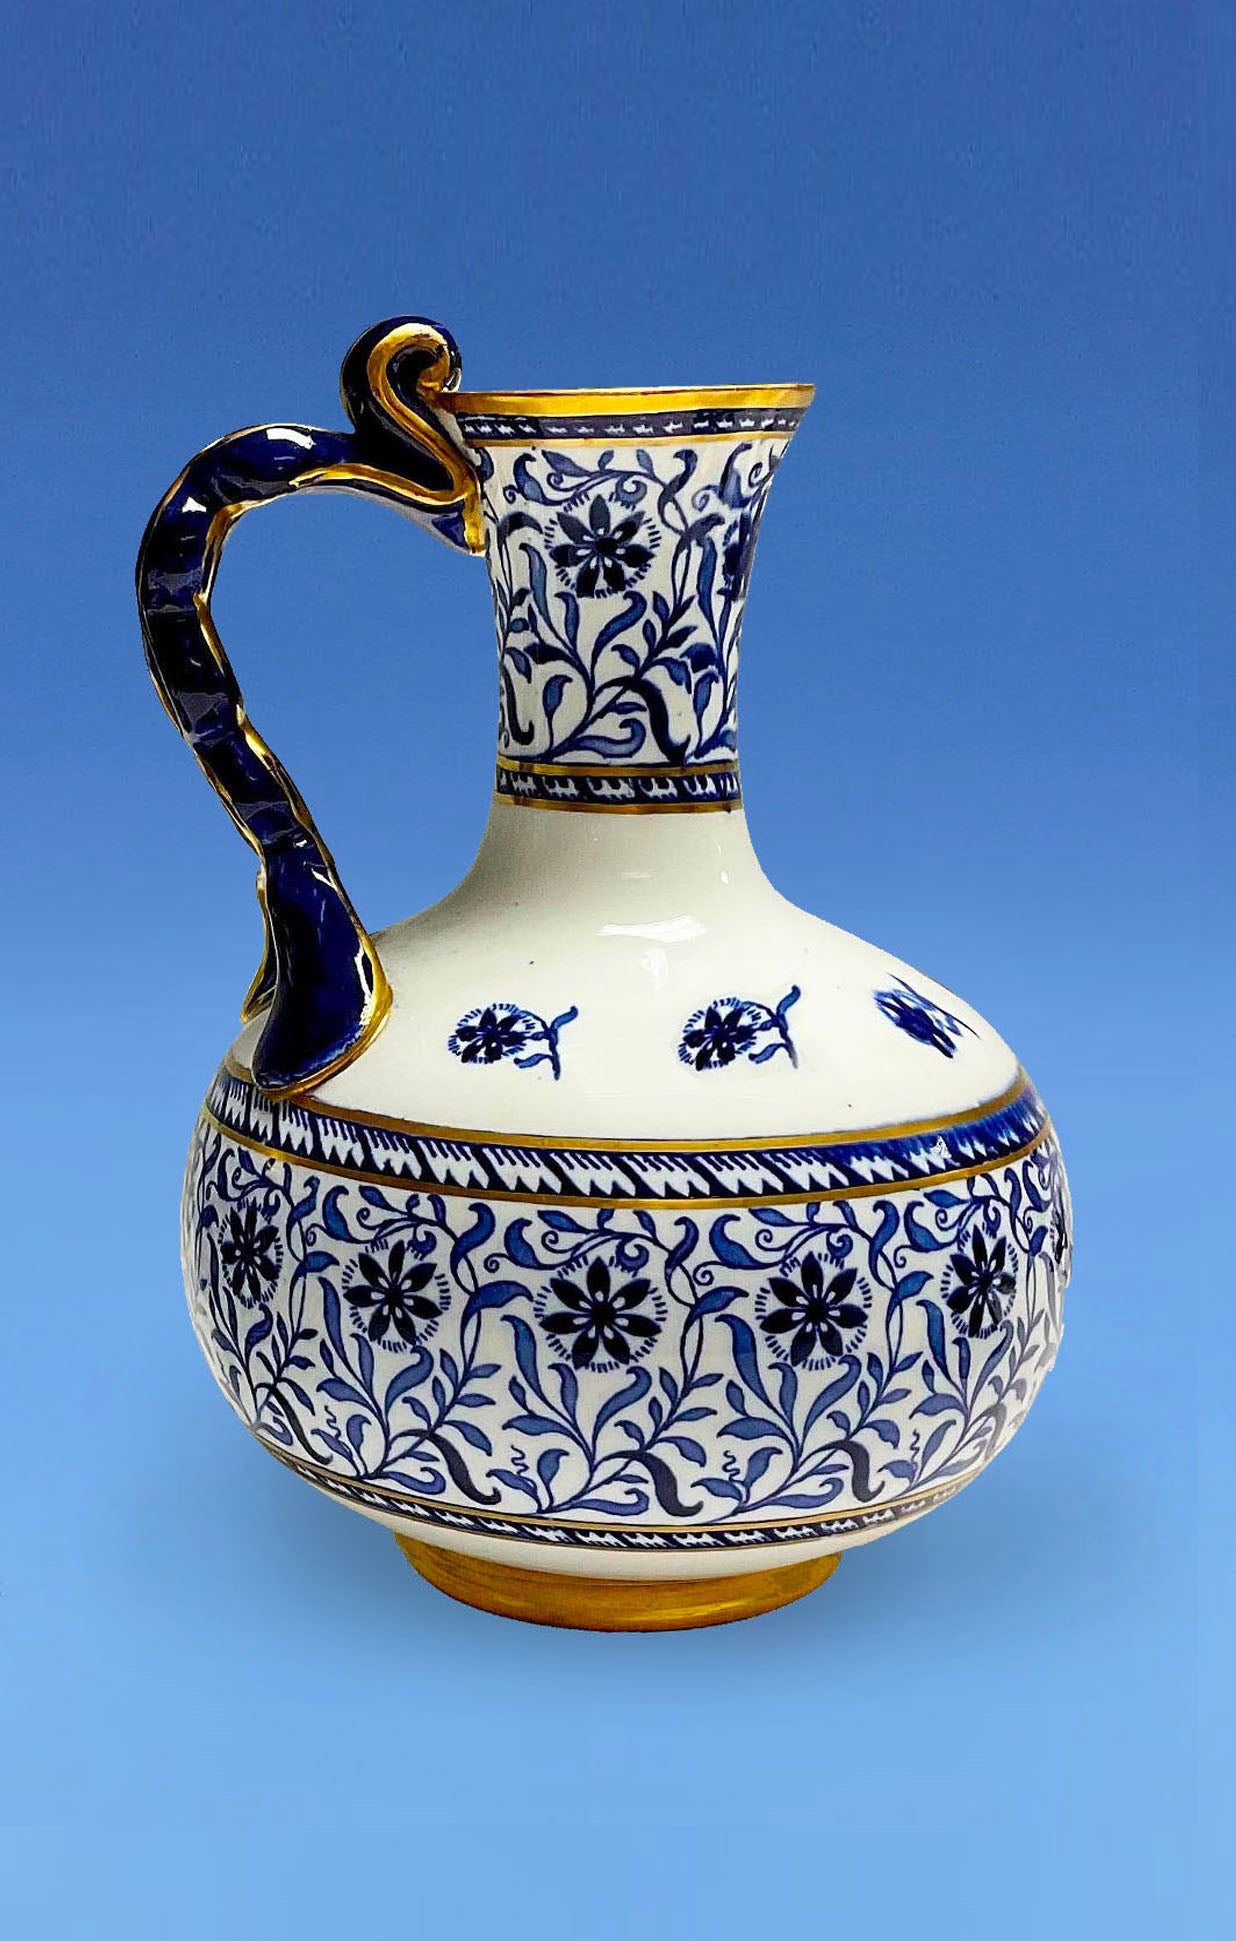 Mintons Aesthetic Movement Glazed Earthenware Blue and White Jug c.1880